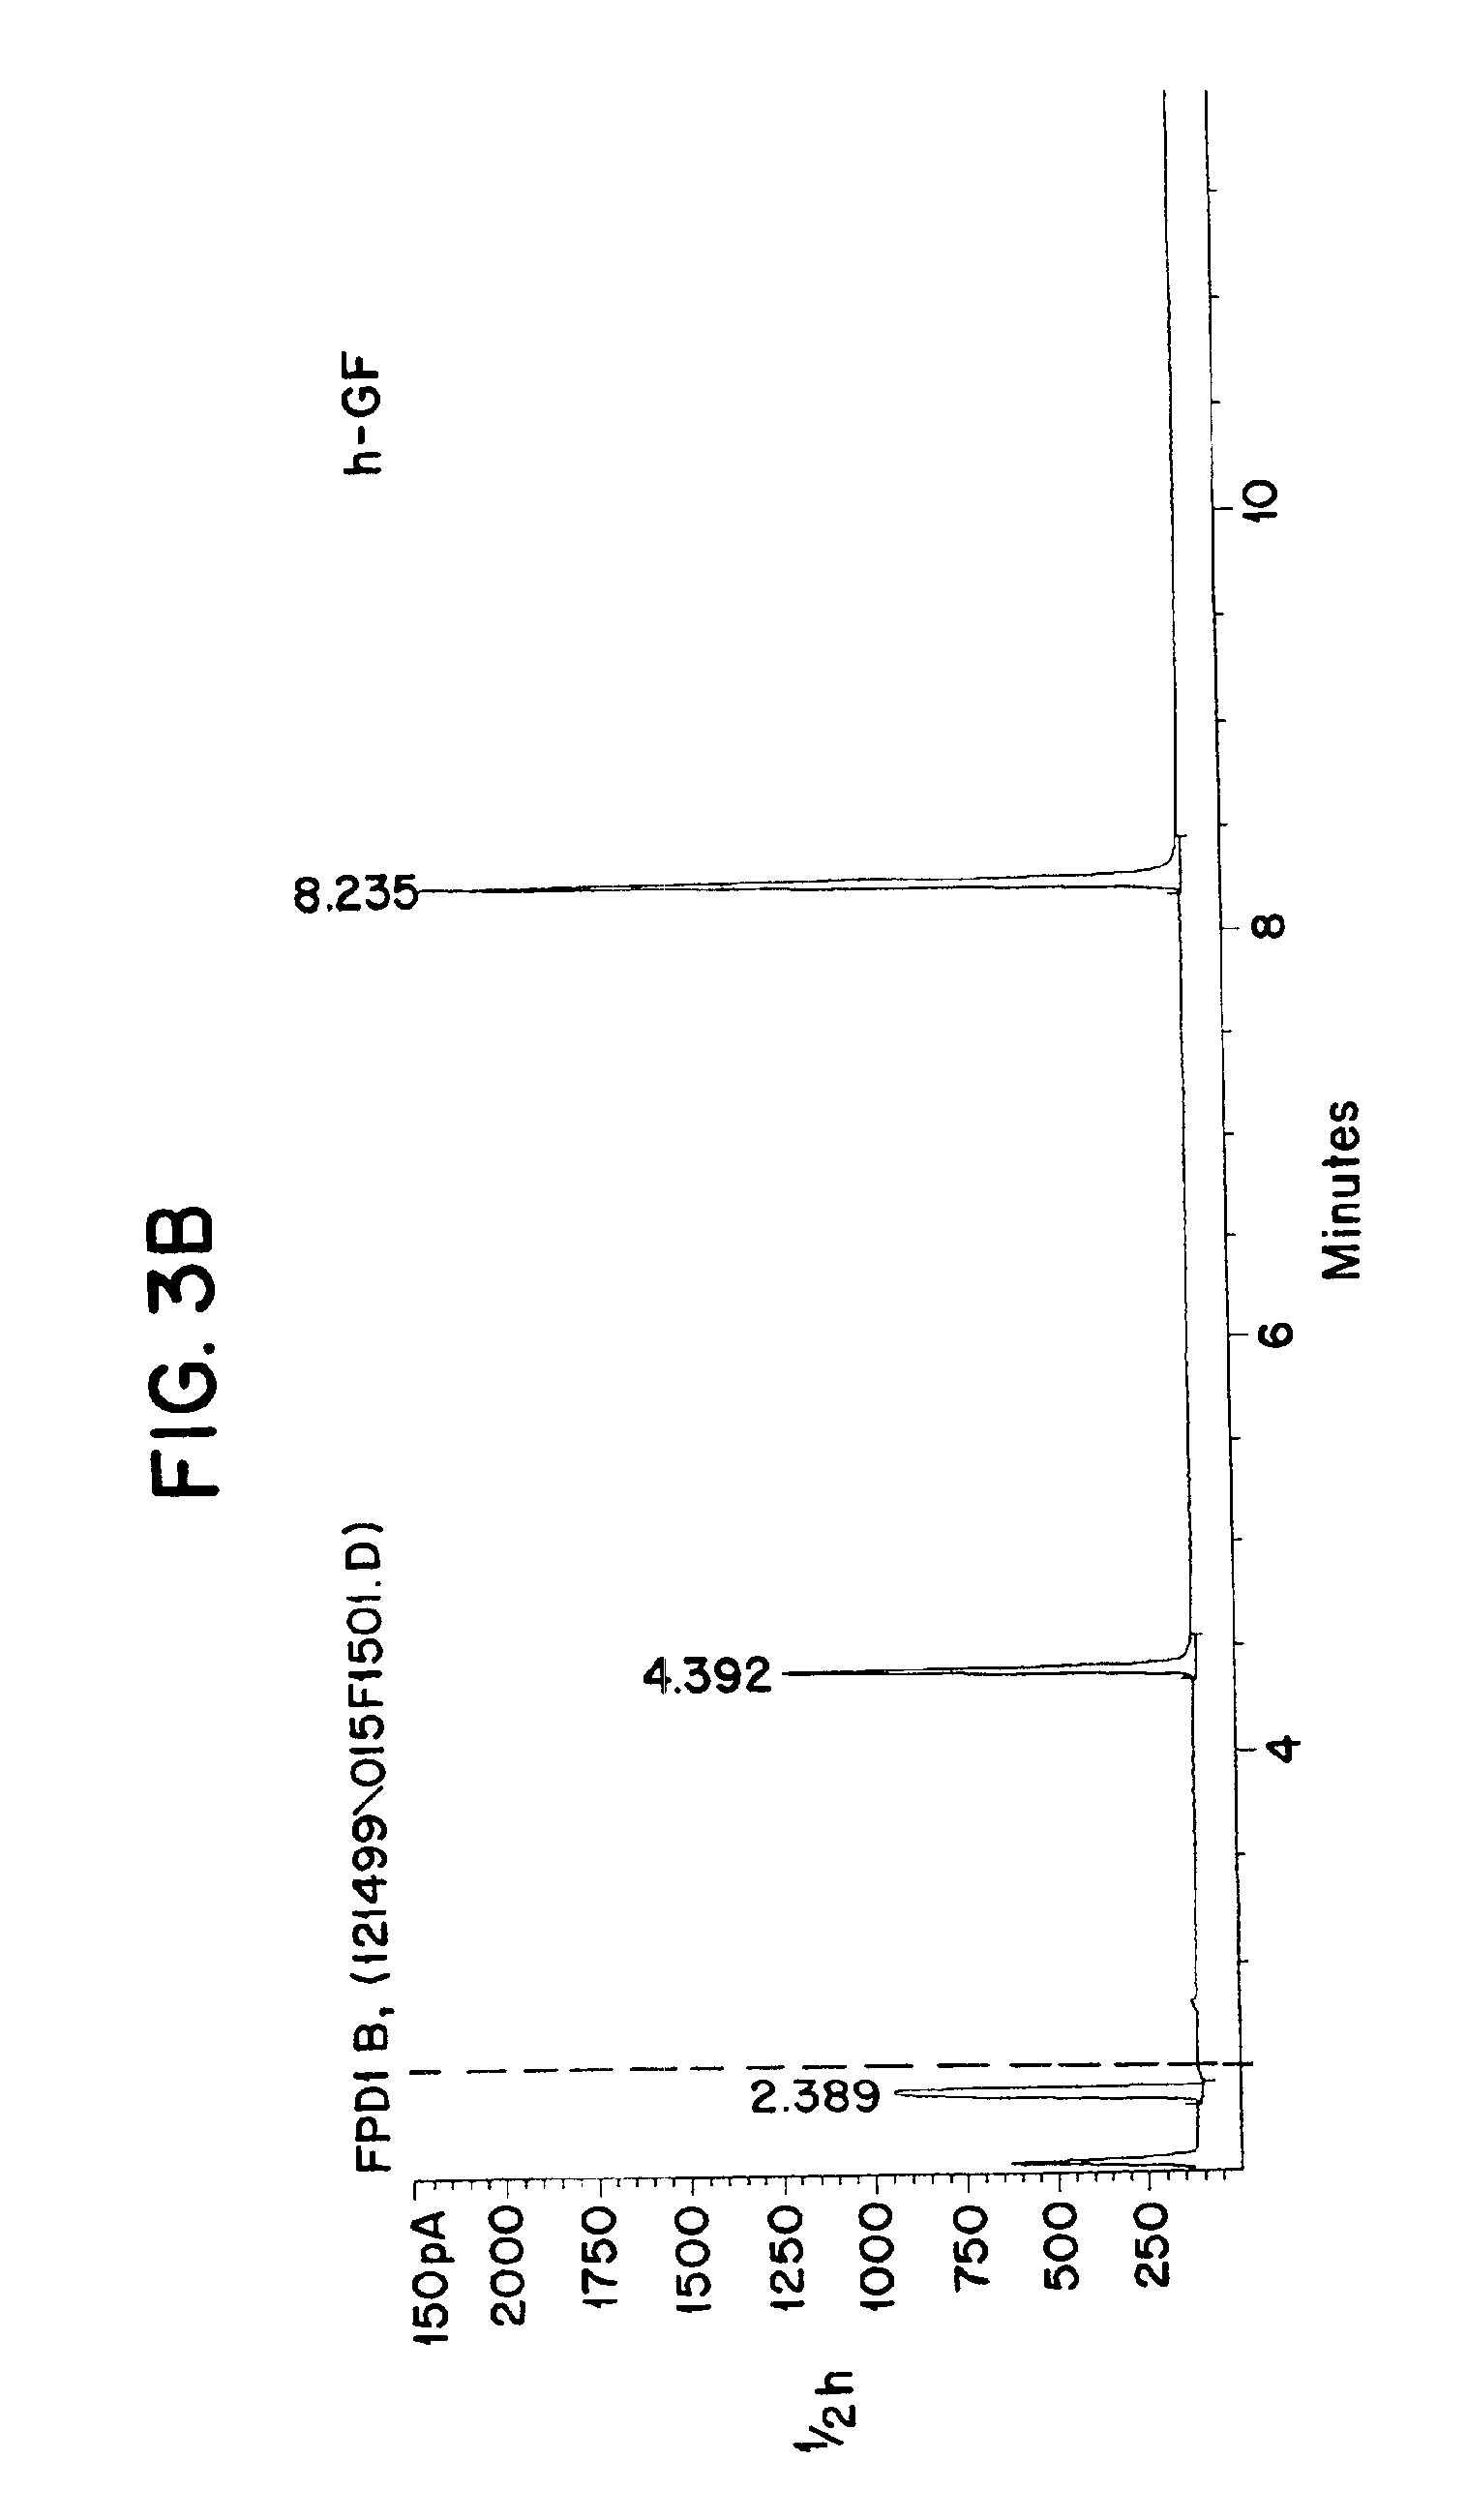 Method for detecting G- and V-agents of chemical warfare and their degradation products